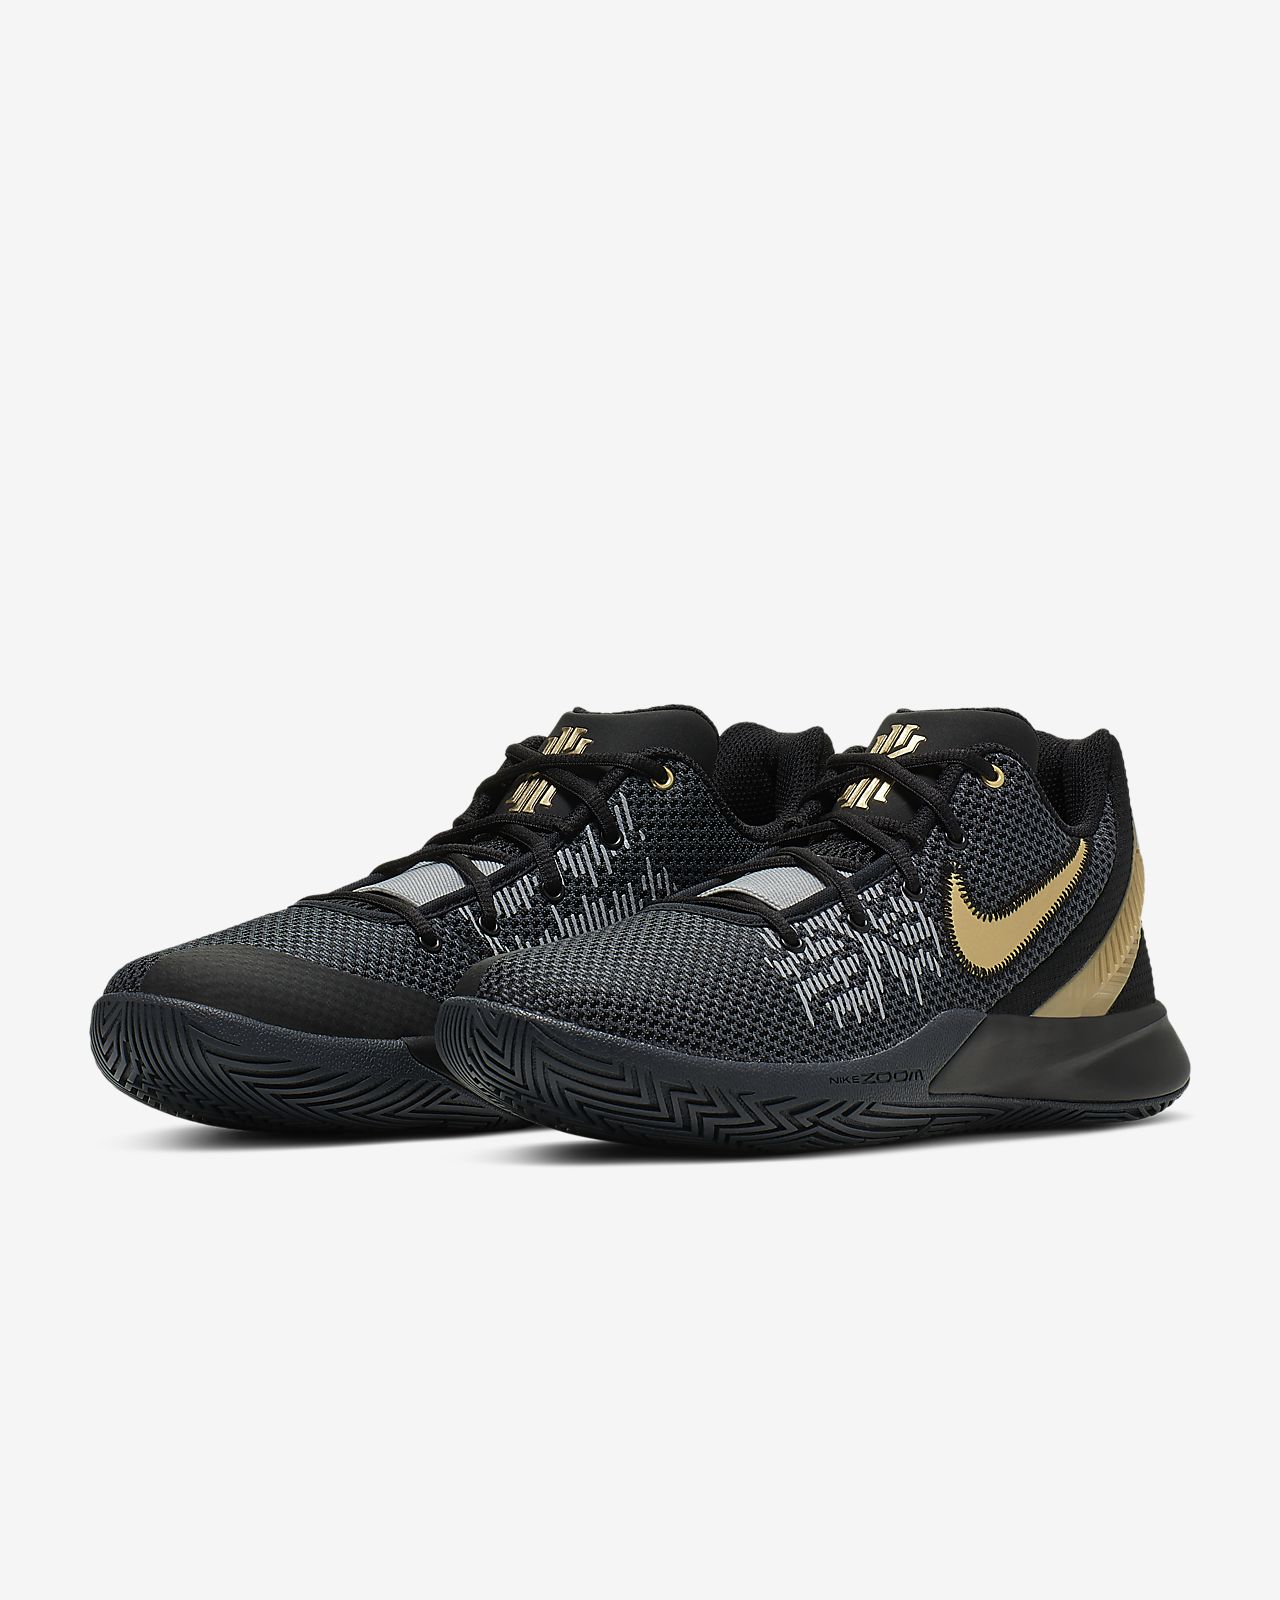 kyrie irving zoom